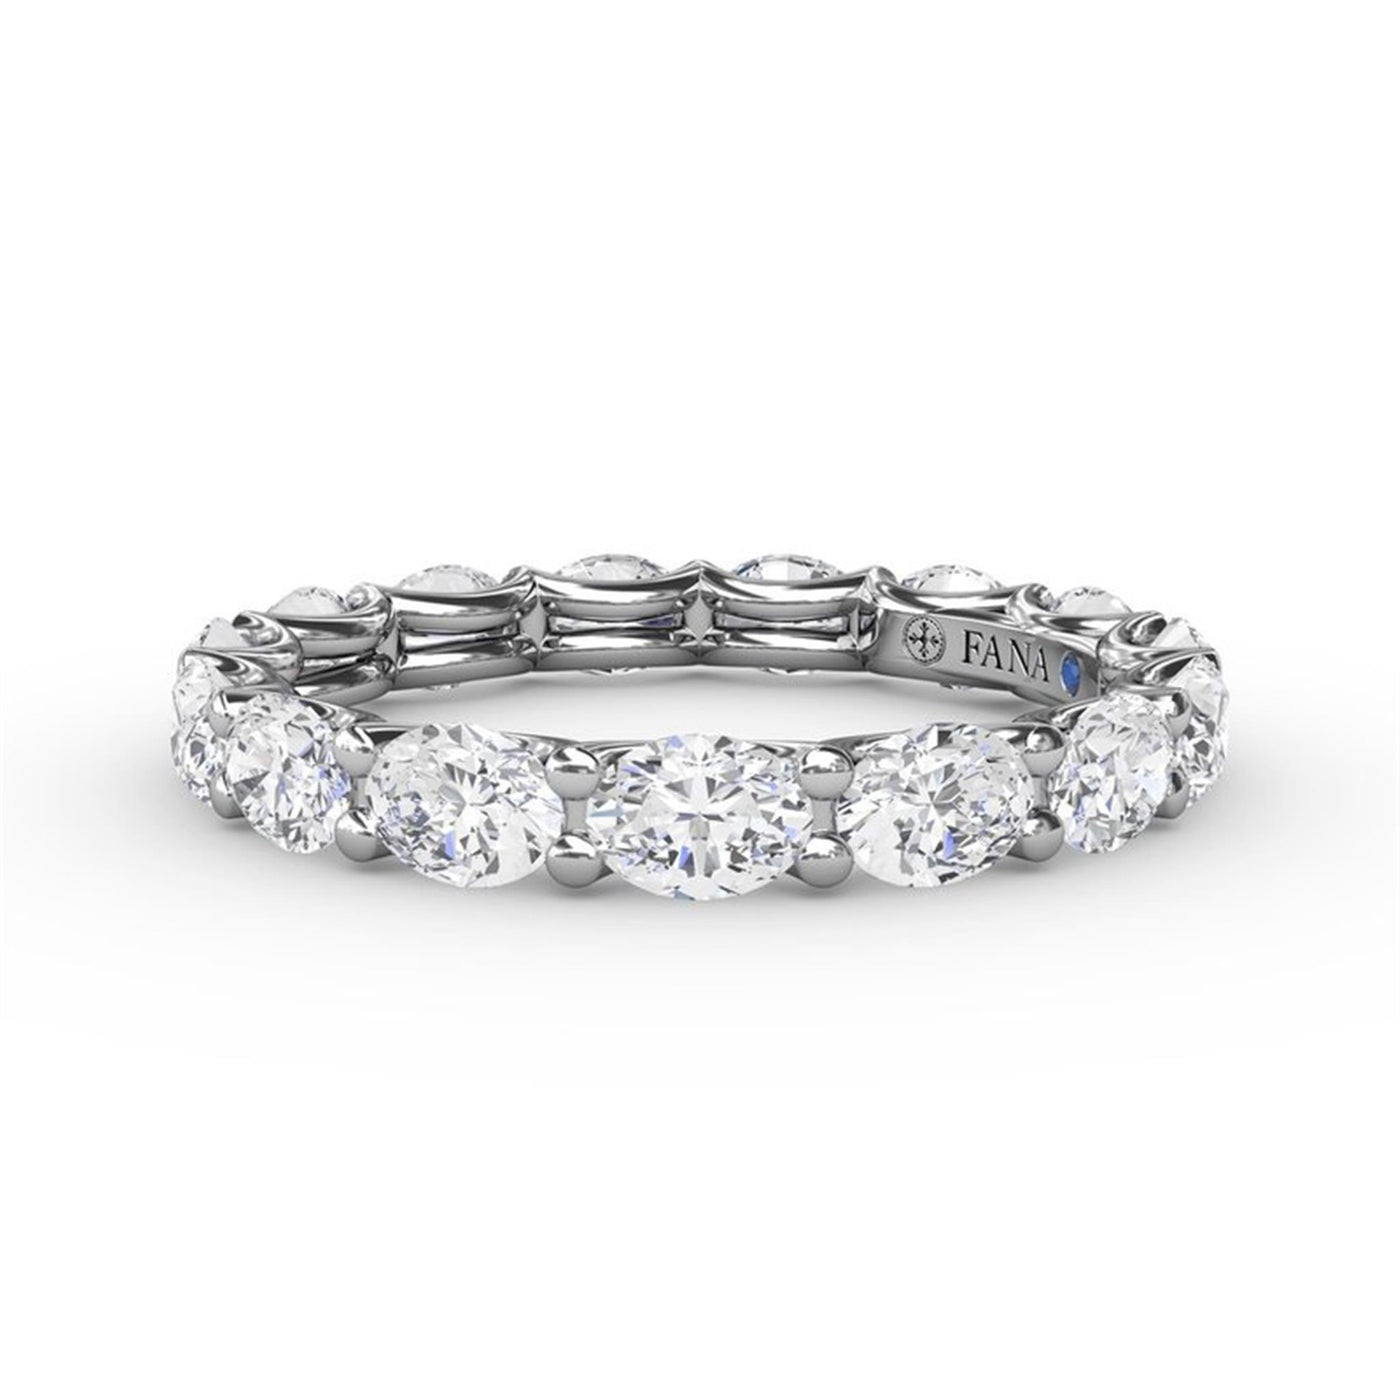 14K White Gold 2.48ctw Diamond Eternity Band 
Featuring a Polished Finish